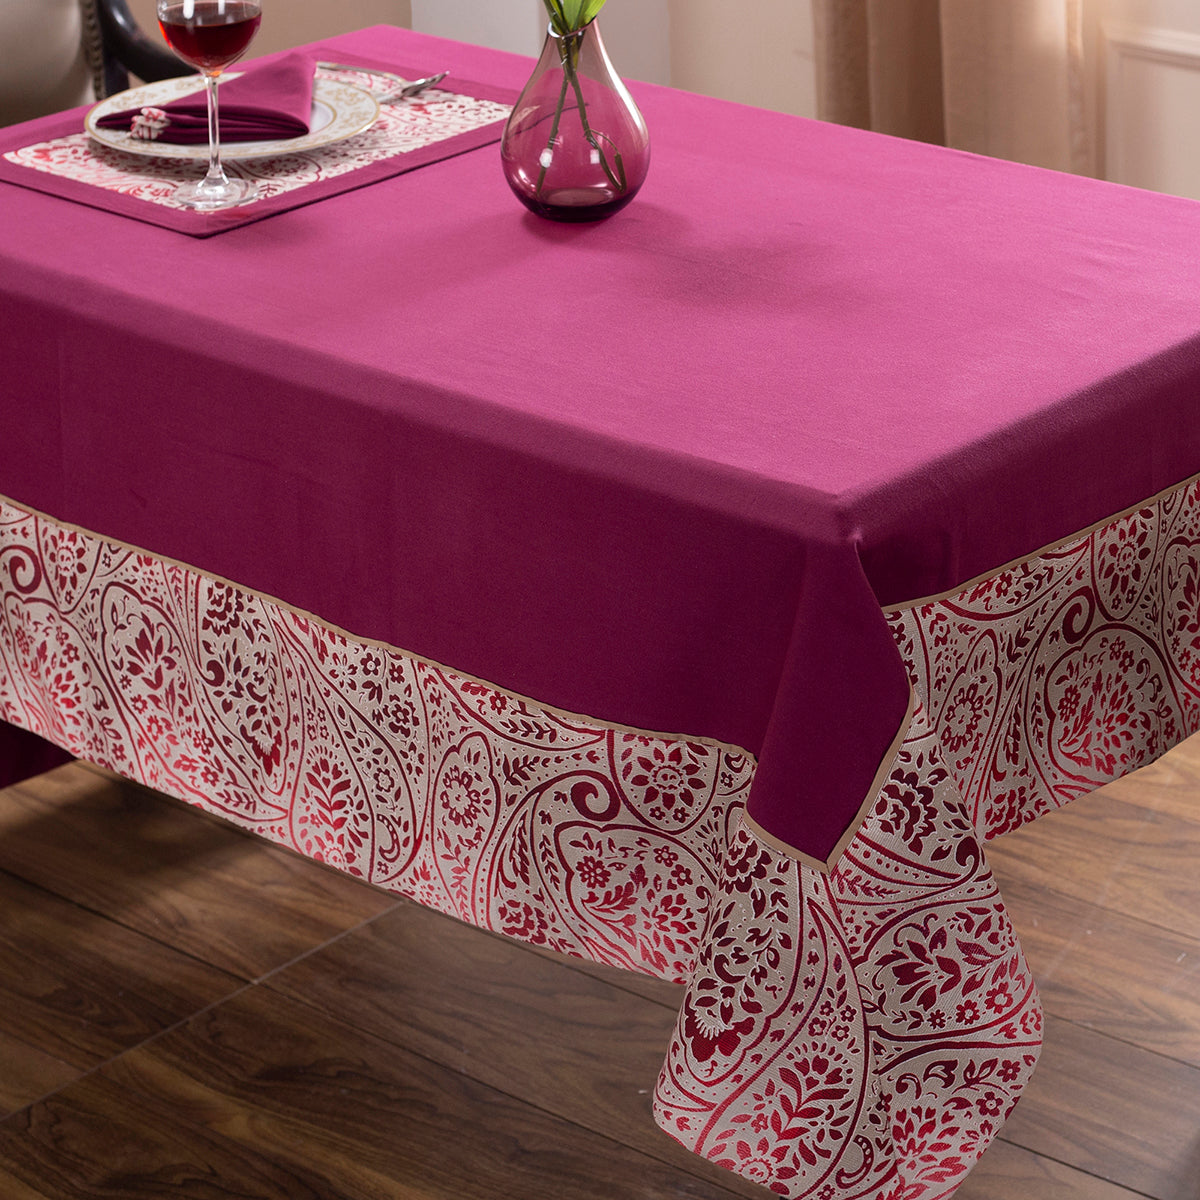 Hues Folklore Transition Ombre Bonanza Red Table Cover